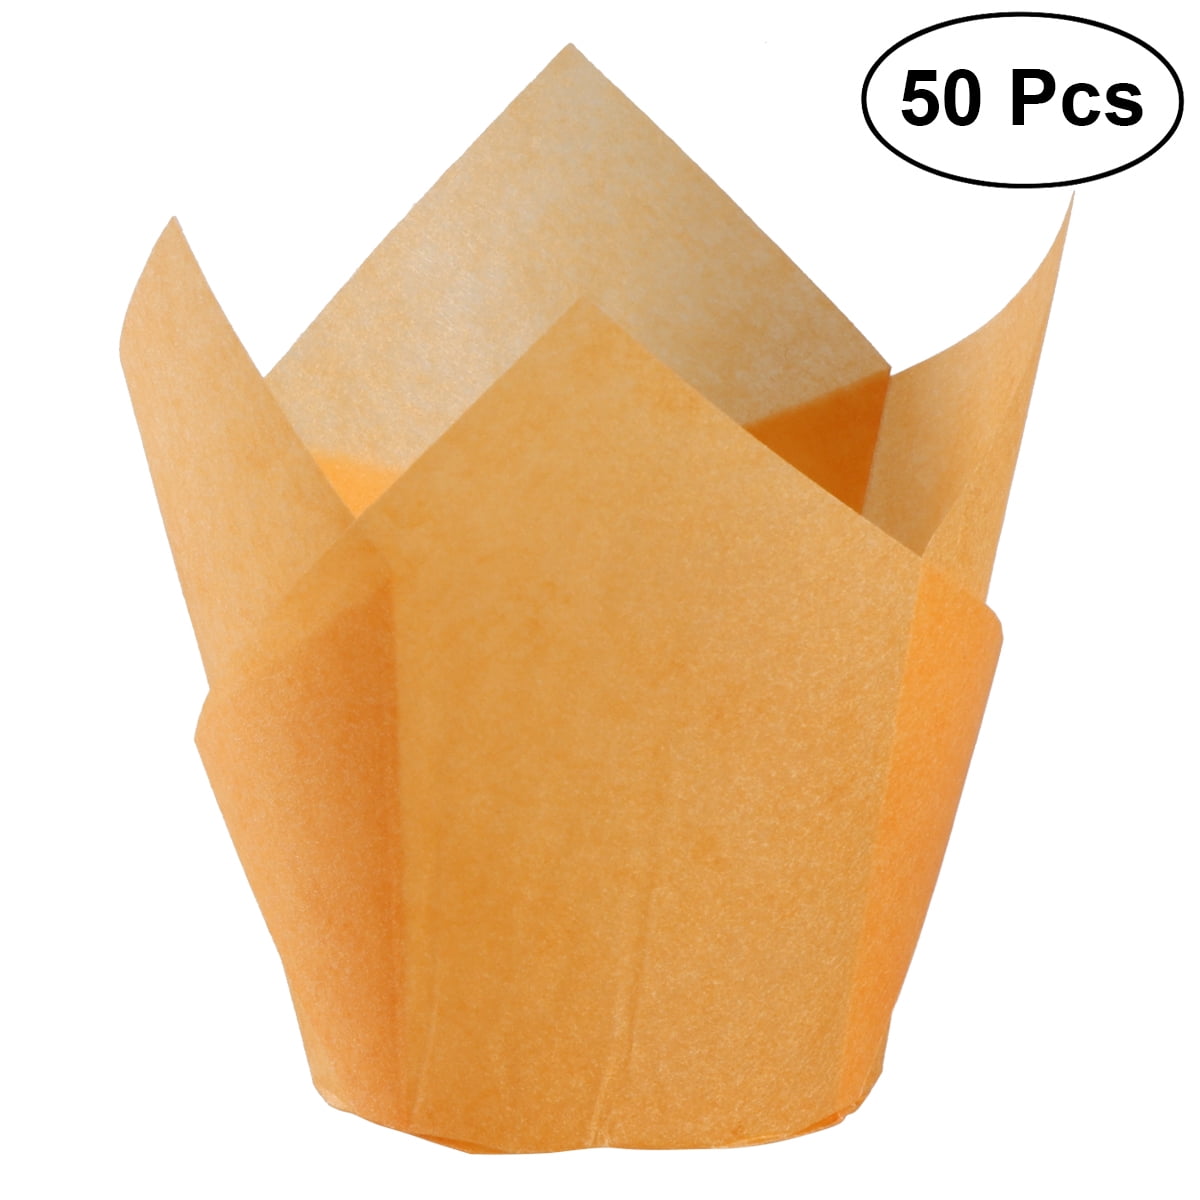 50pcs/set Cupcake Wrapper Baking Cups Liners Muffin Cup Tulip Case Cake Paper // 